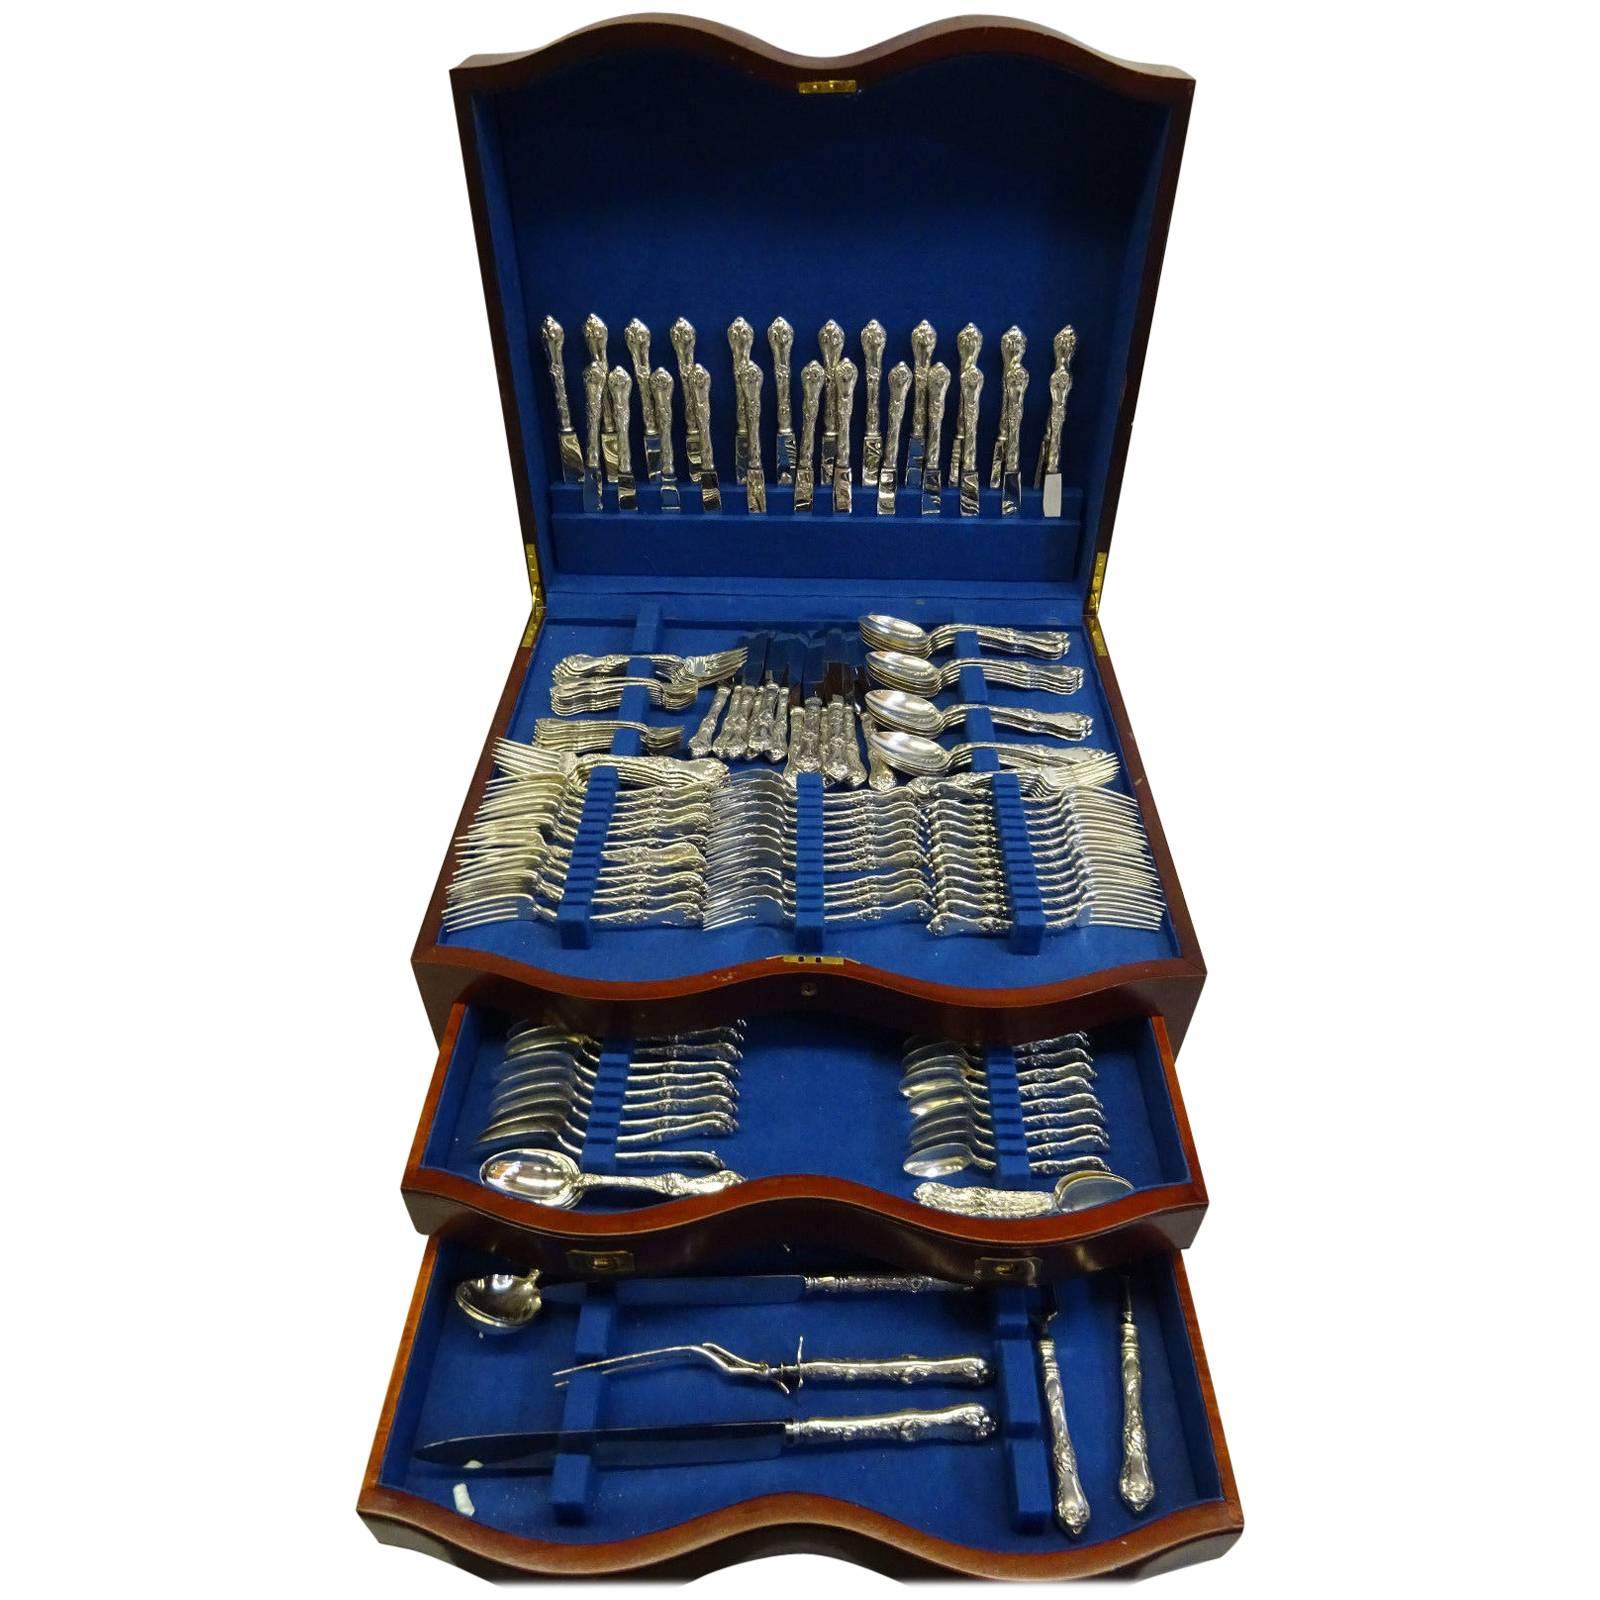 Fabulous Les Cinq Fleurs (Five Flowers) by Reed & Barton Massive sterling silver dinner and luncheon flatware set for 18, 224 Pieces. This beautiful floral, multi-motif Art Nouveau pattern was introduced in the year 1900. This set includes:

18